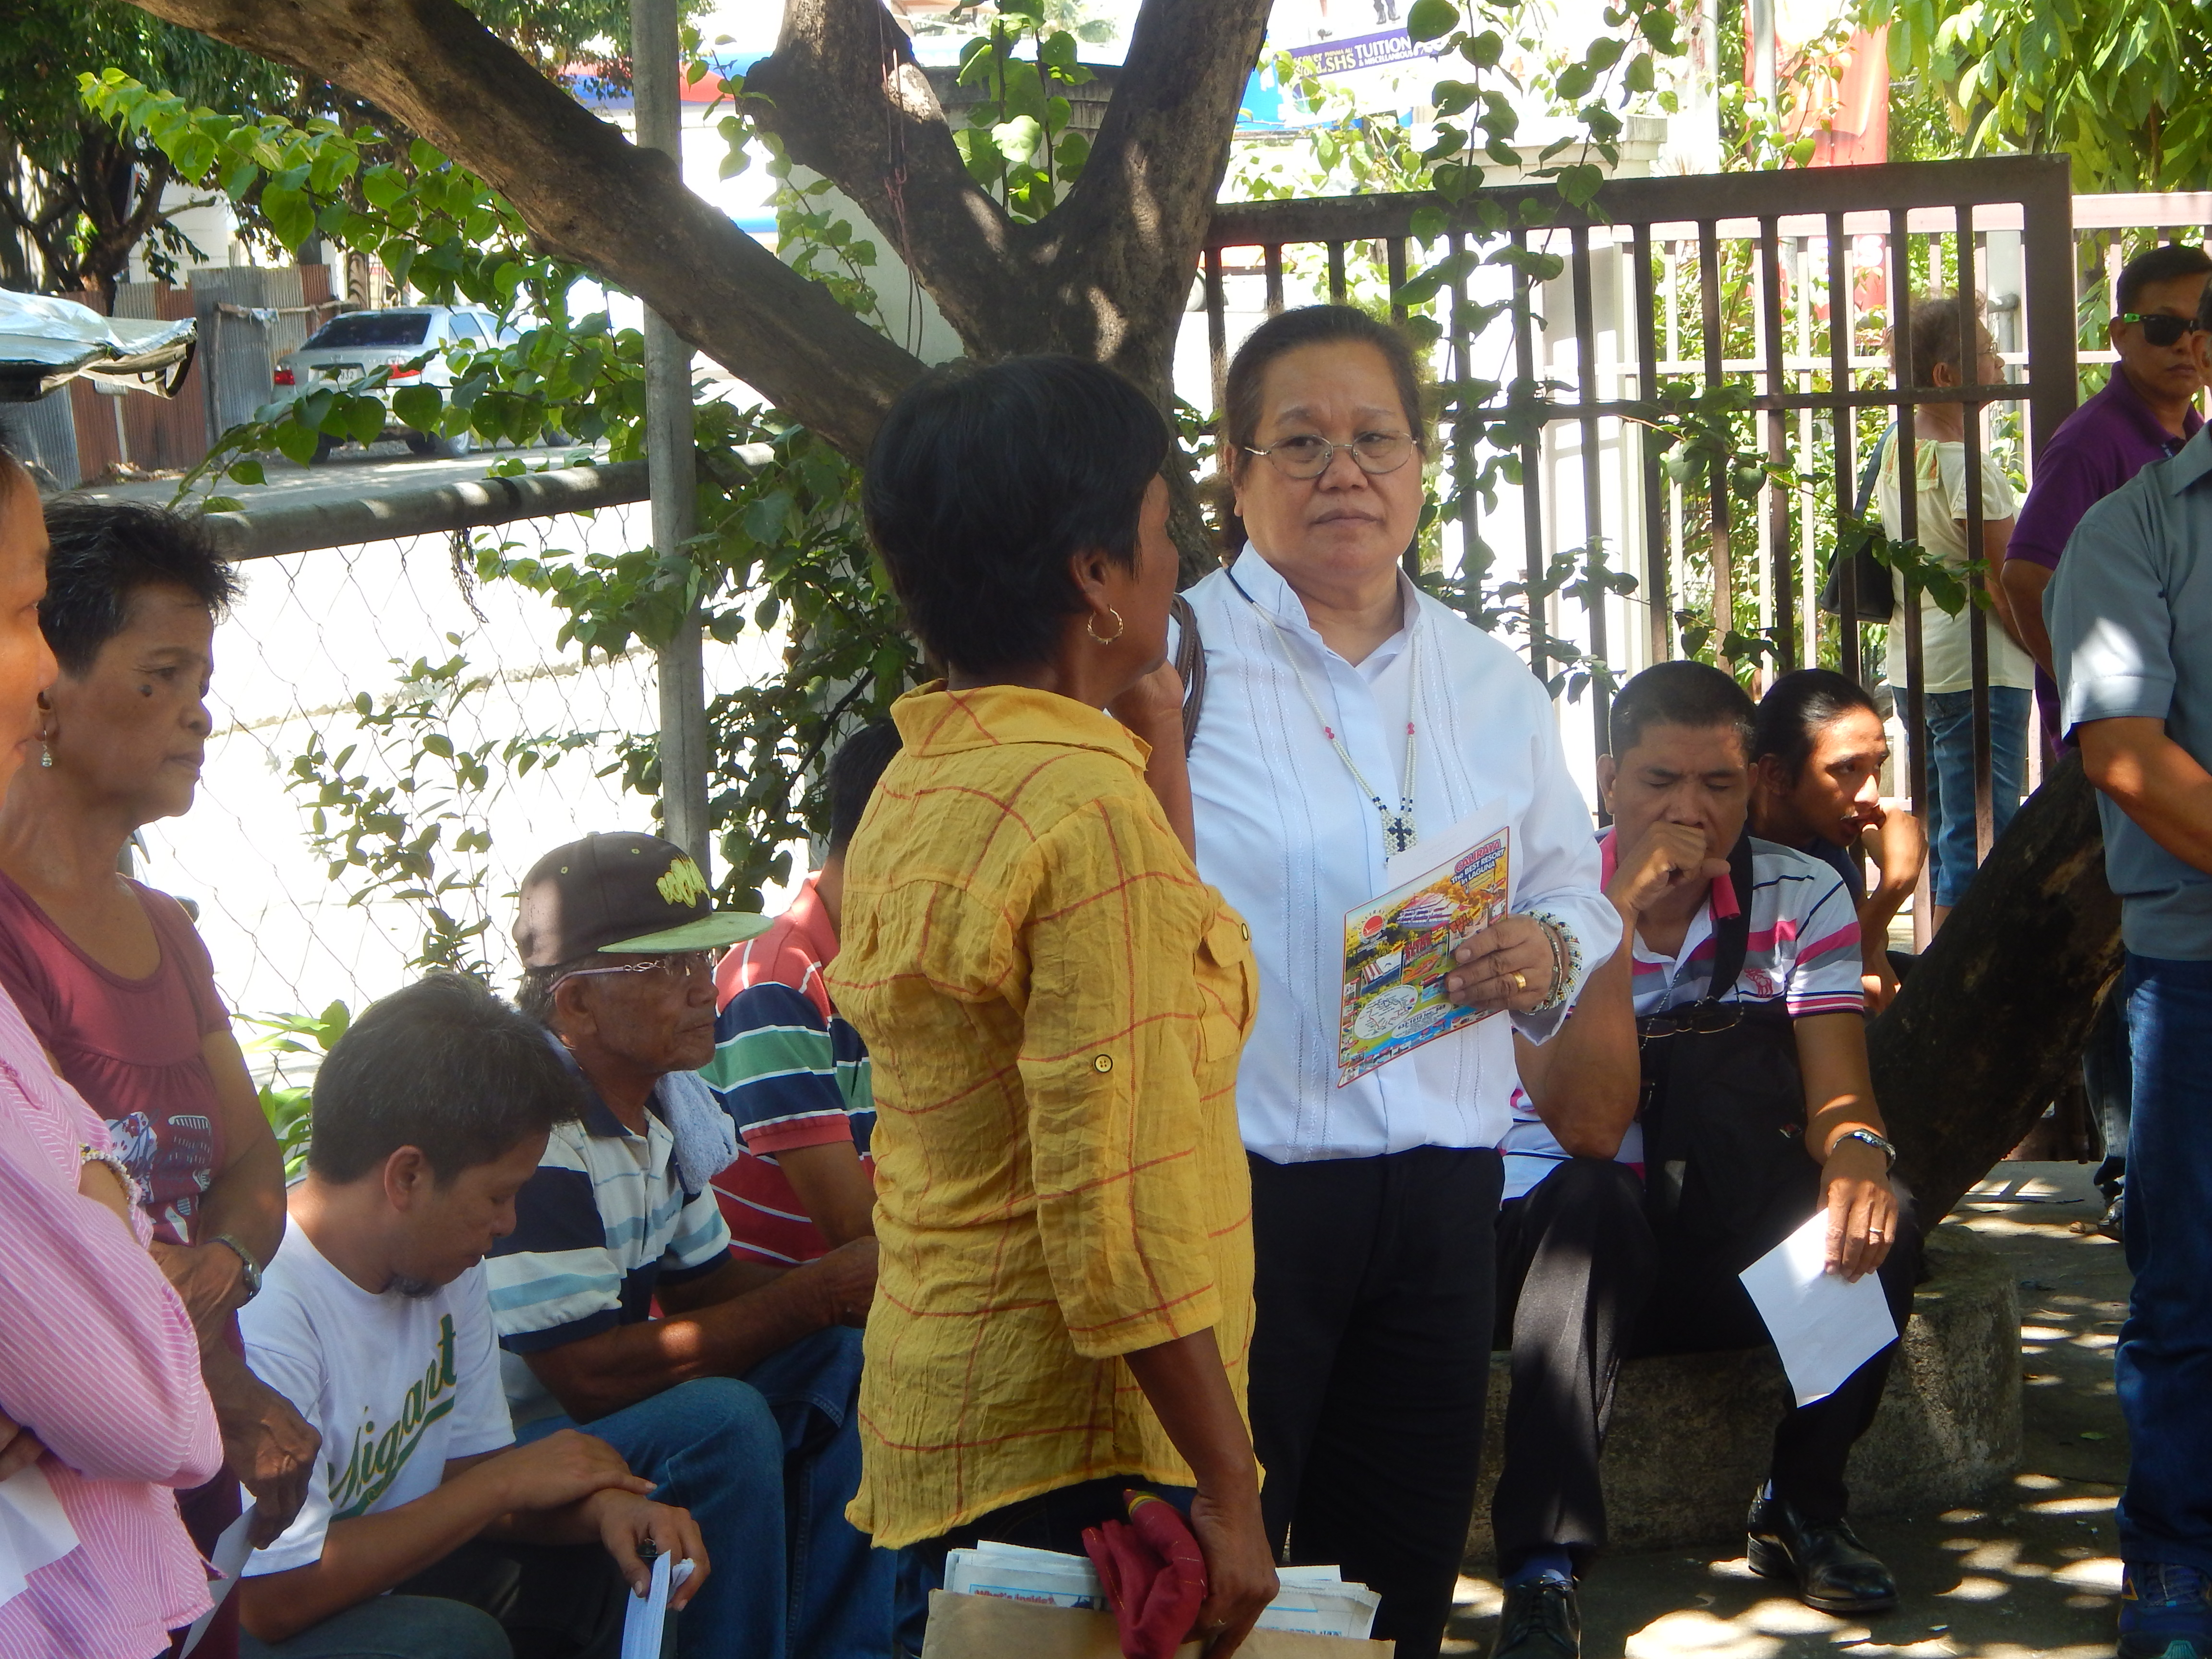 The first time that I met Pastor Sol, when we took a van ride to the trial against Mary Jane Veloso's recruiters. Here, in the parking lot of the court, she is leading prayers and standing beside Celia Veloso, Mary Jane's mother. (June 2016)